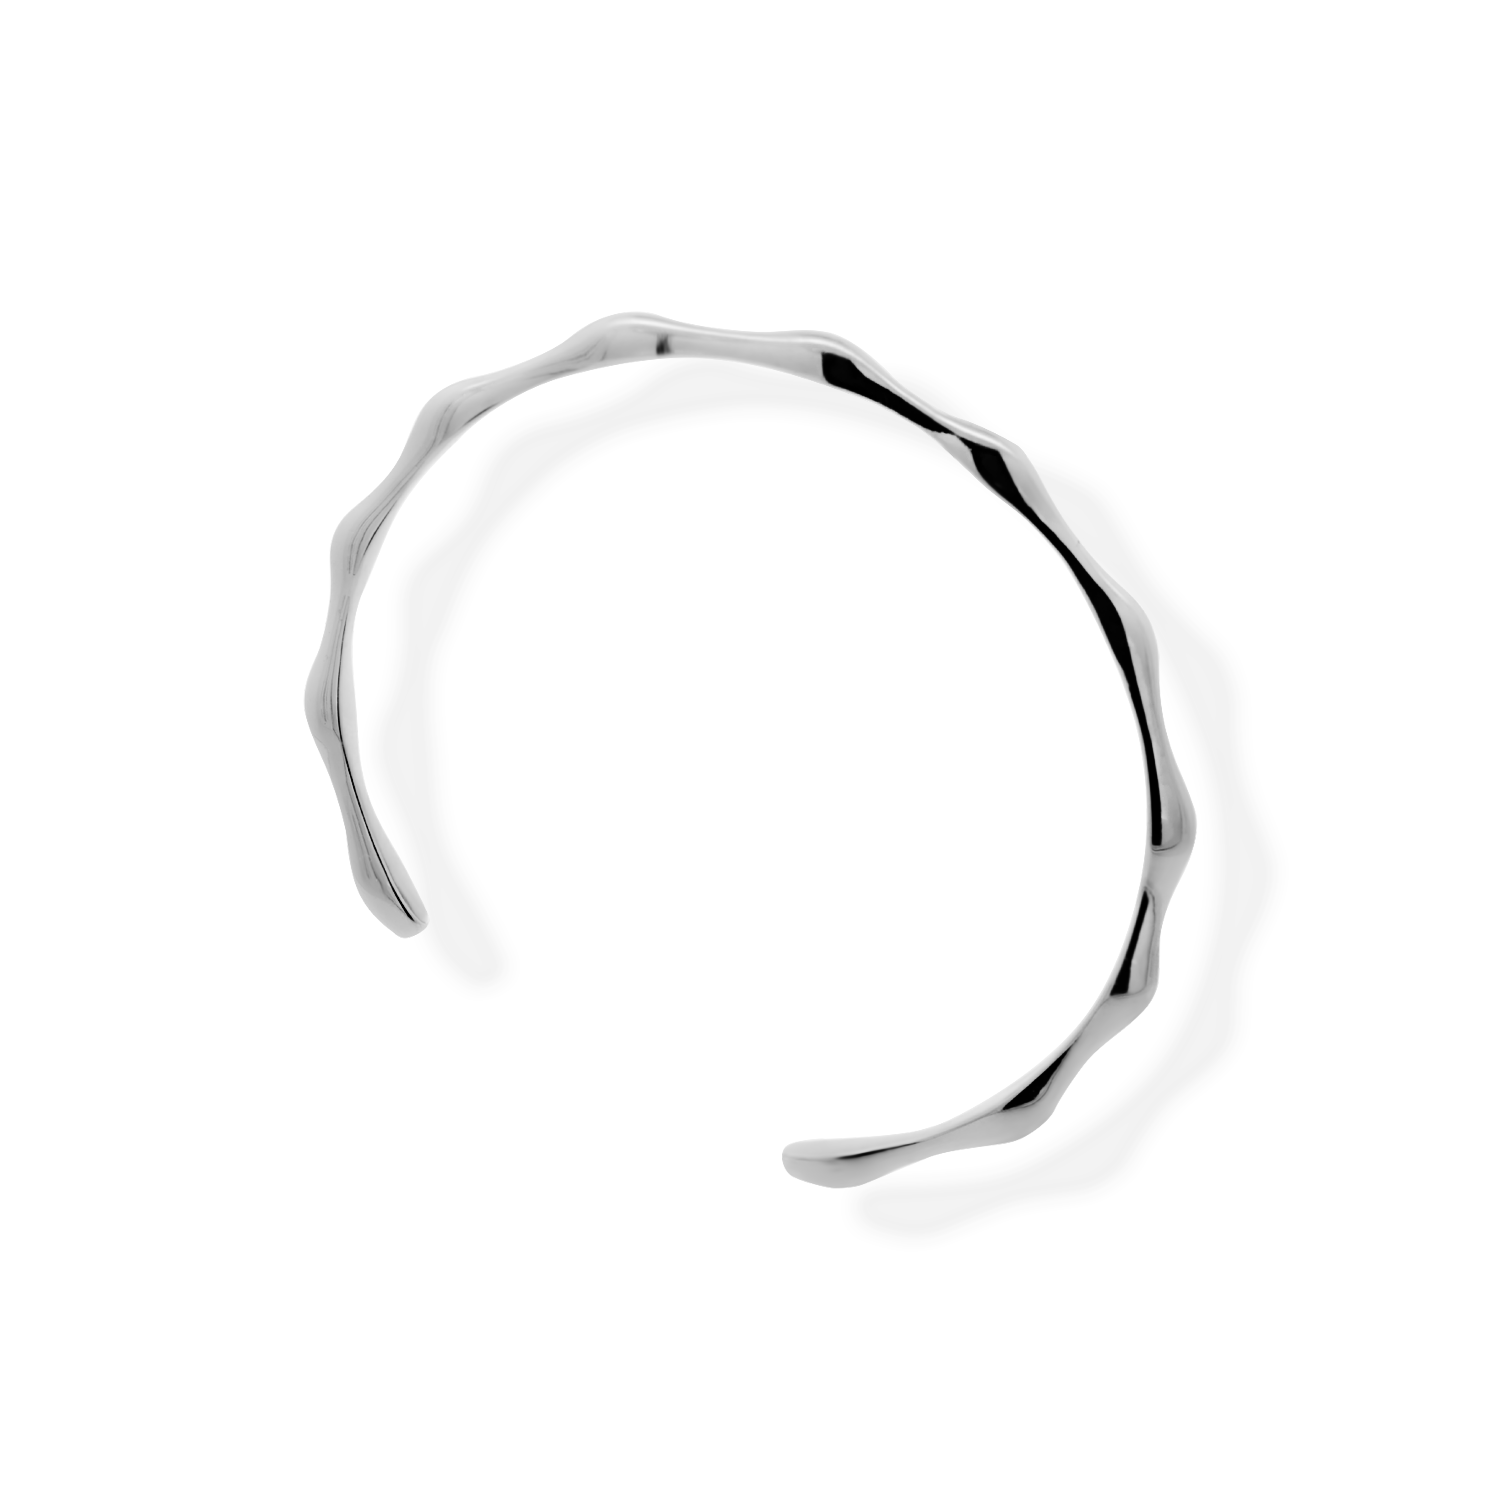 Minimalist and chic bangle in 925 silver.